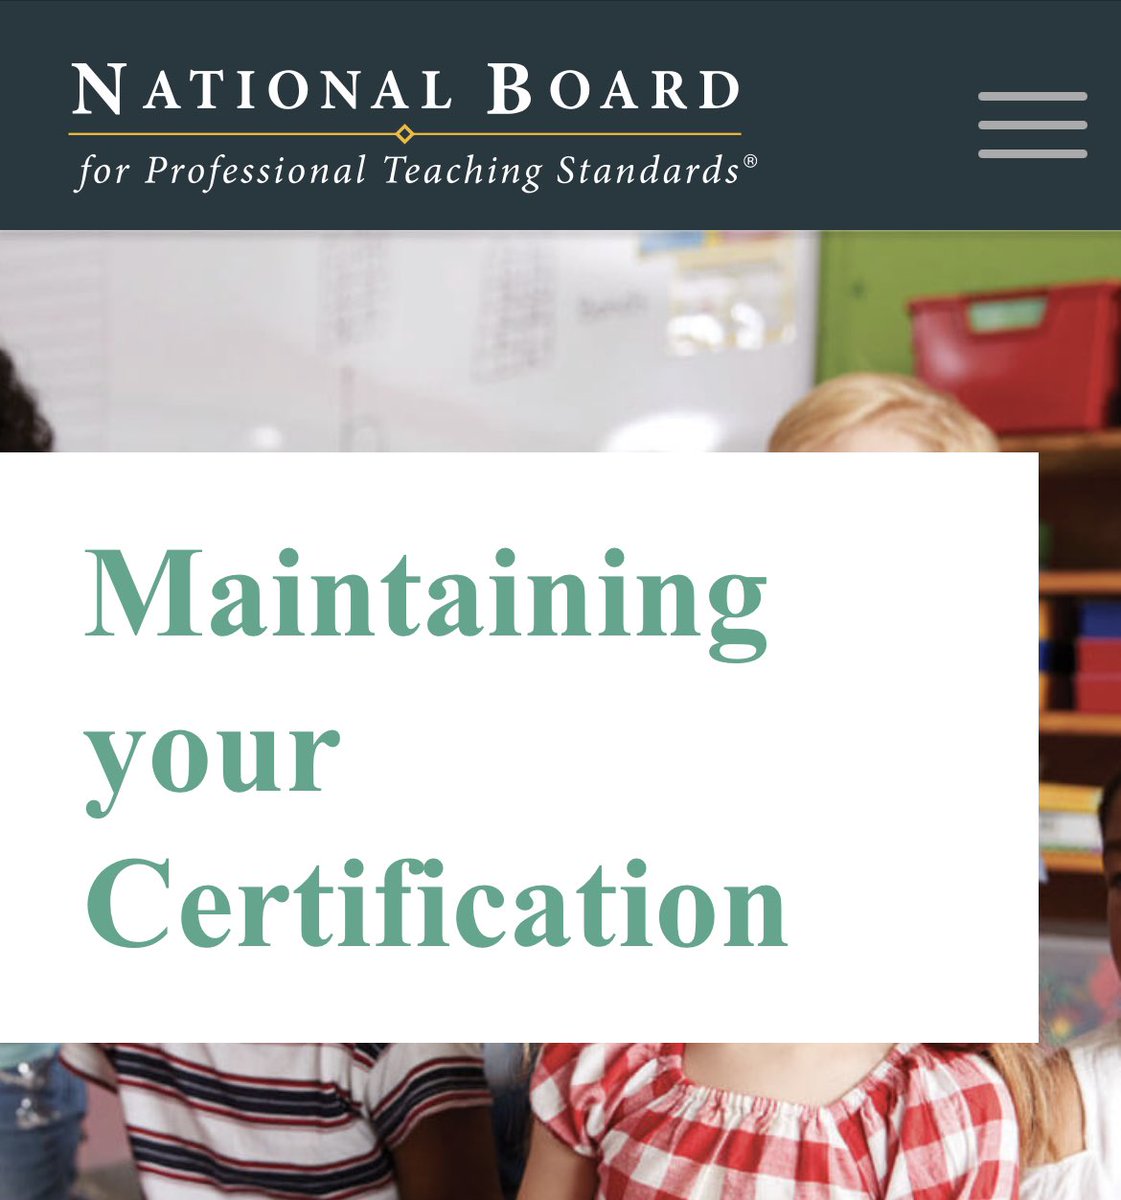 Now it’s real!! Just registered to begin my #MOC for my National Board recertification!! Eekkk!!! @NBPTS @TexasNBCT